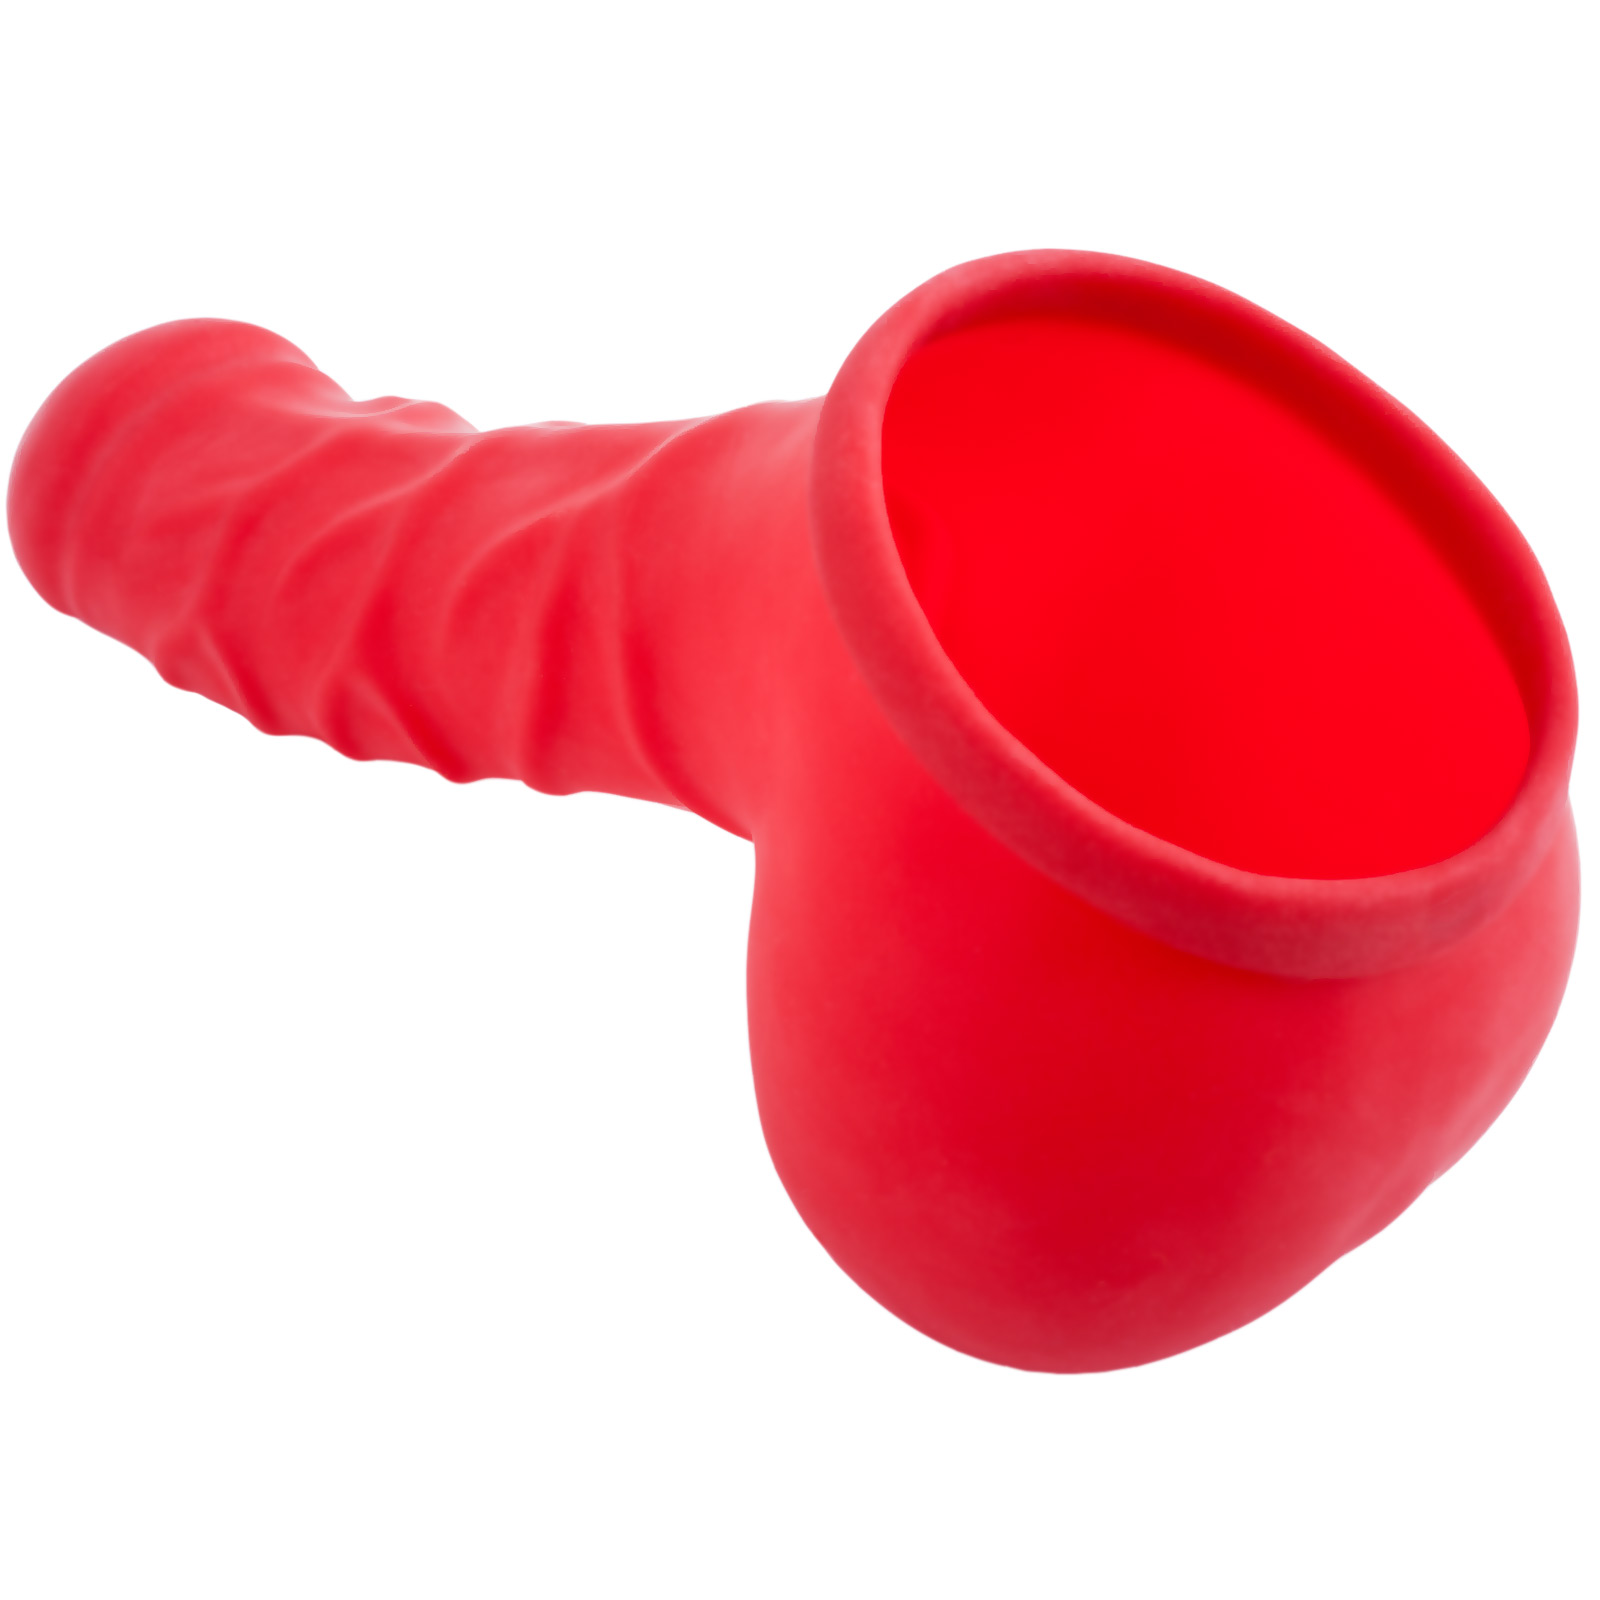 Toylie Latex Penis Sleeve «FRANZ» red, with strong veins and molded scrotum